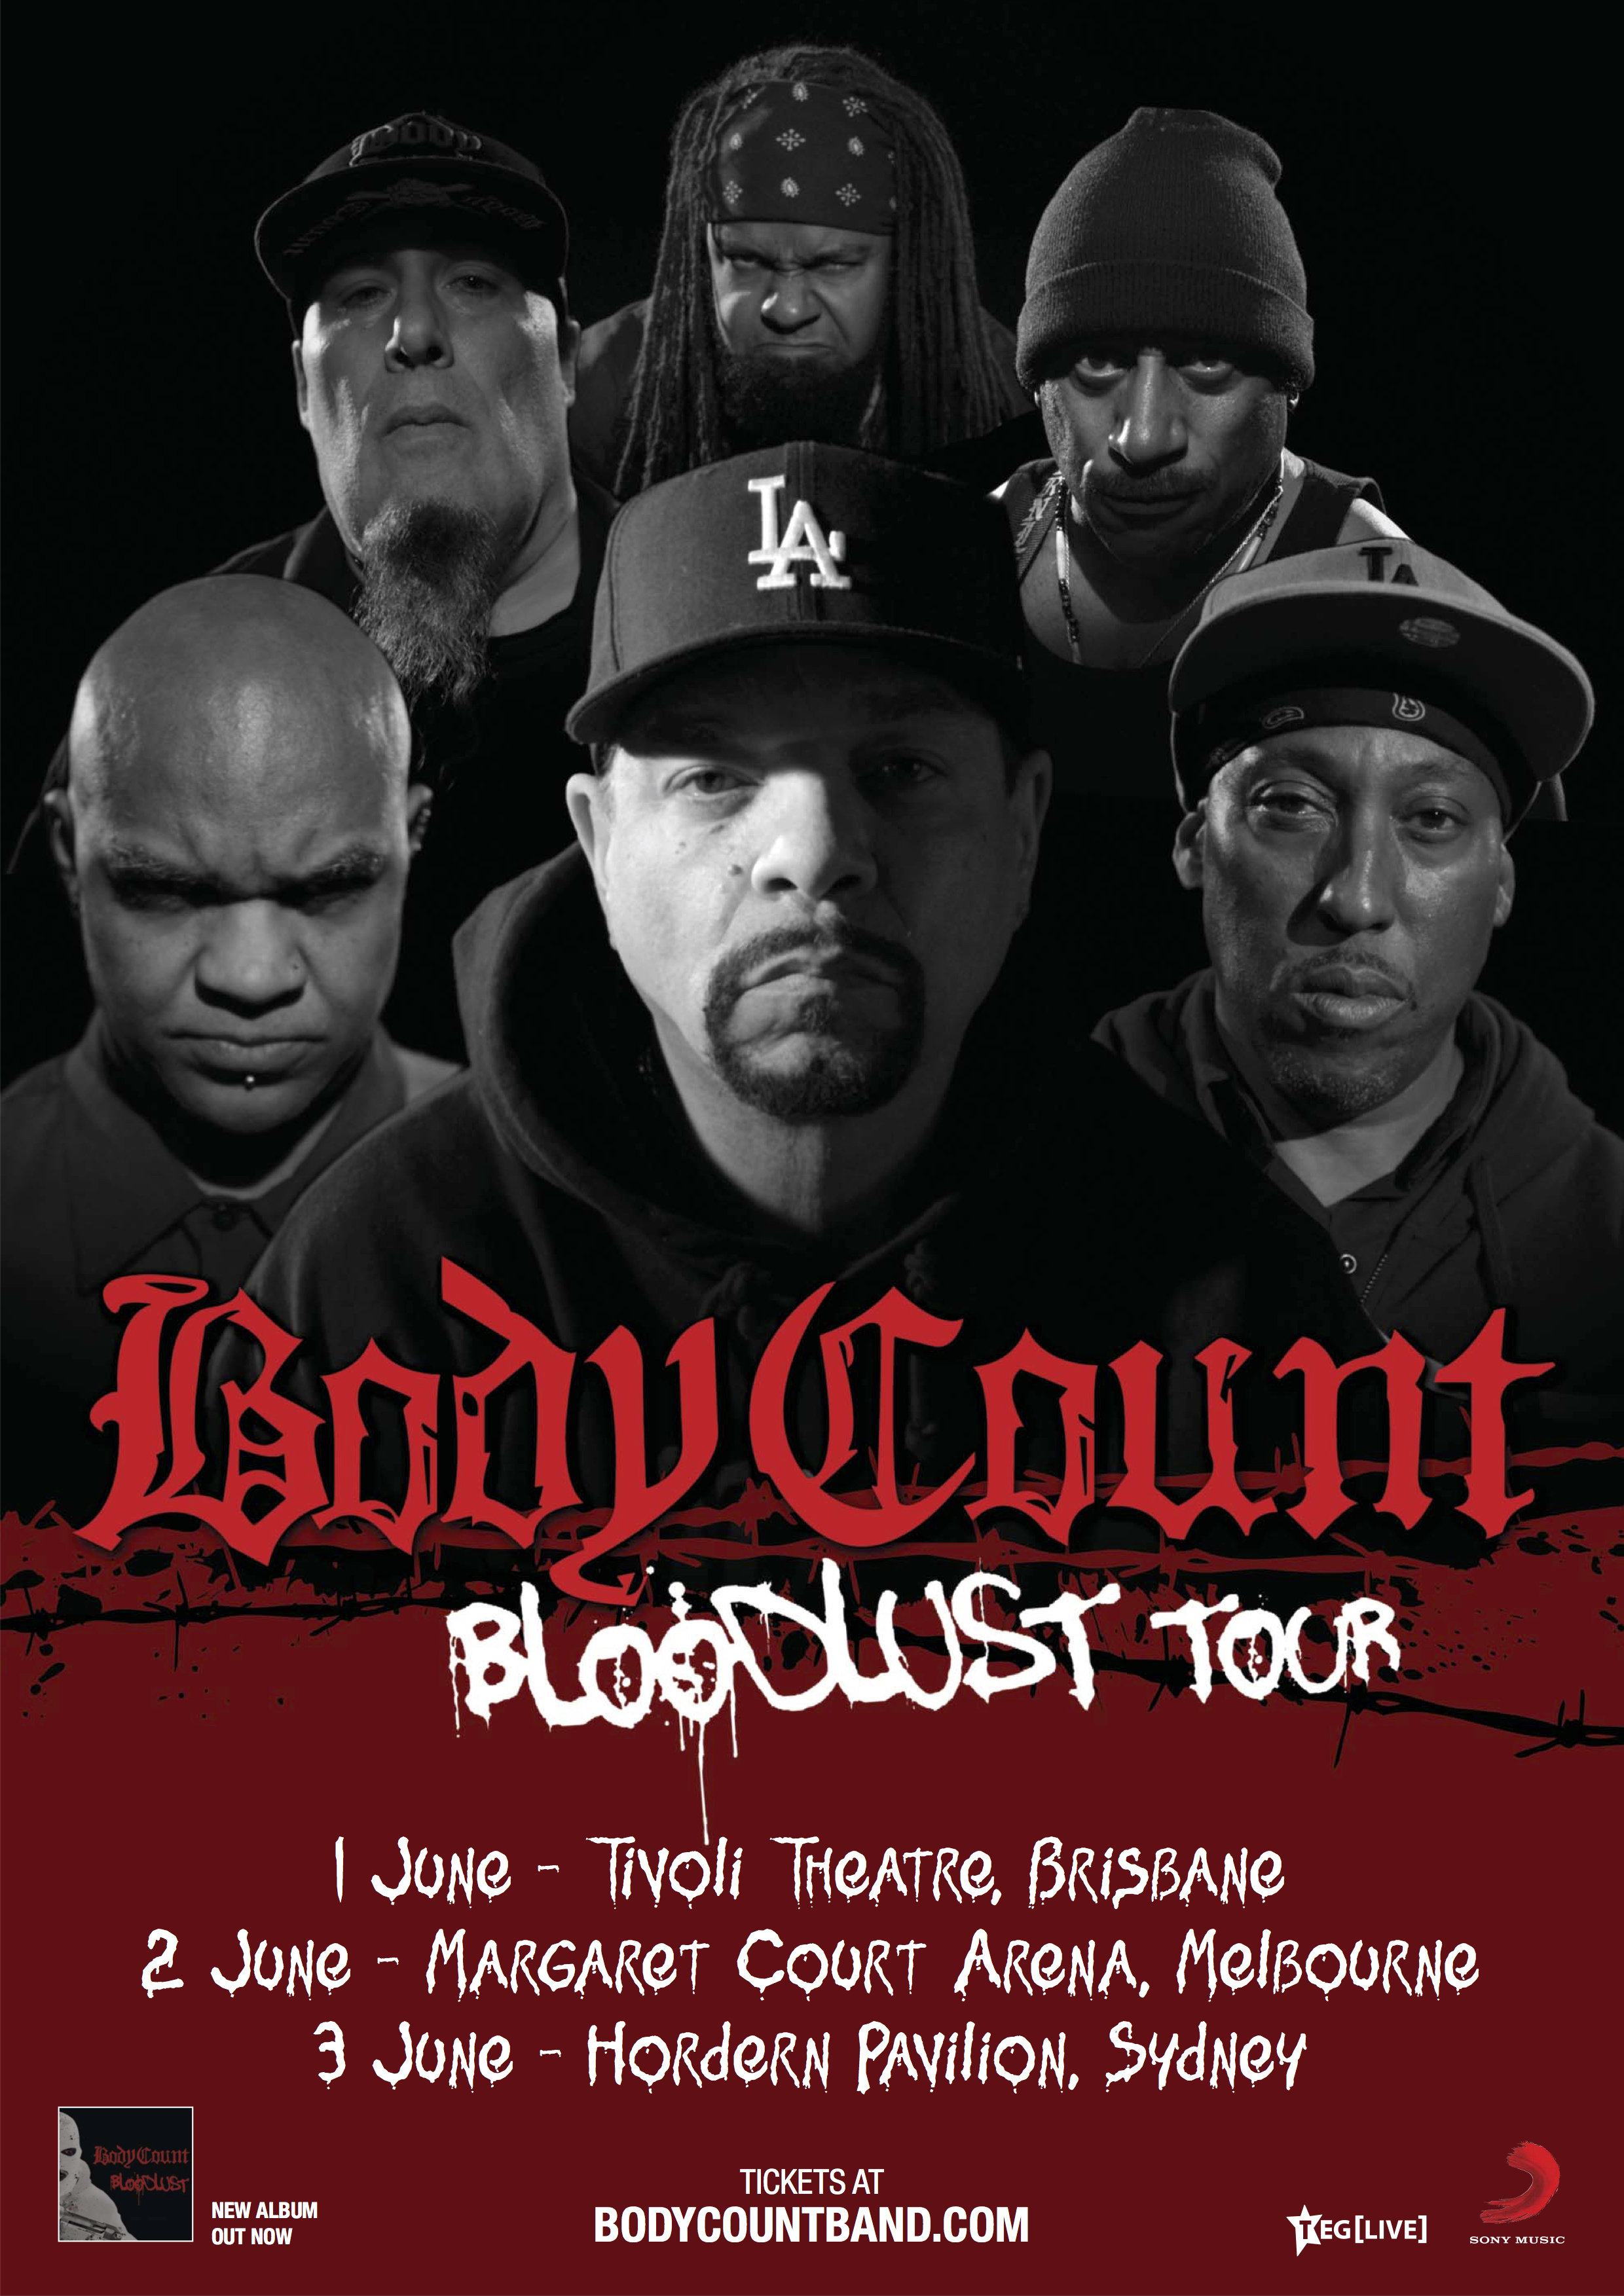 BODY COUNT return to Australia for the first time in 22 years for the